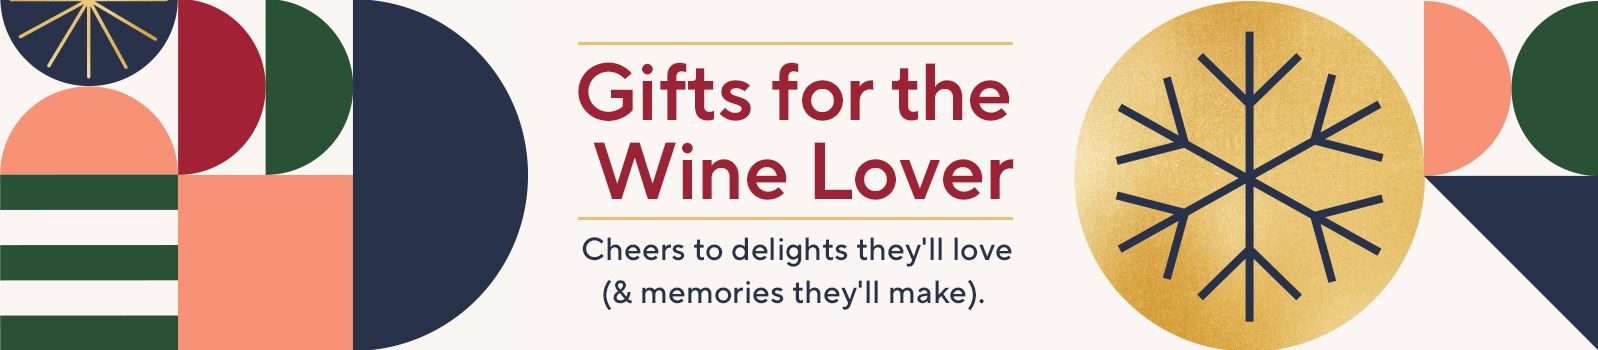 Gifts for the Wine Lover  Cheers to delights they'll love (& memories they'll make). 